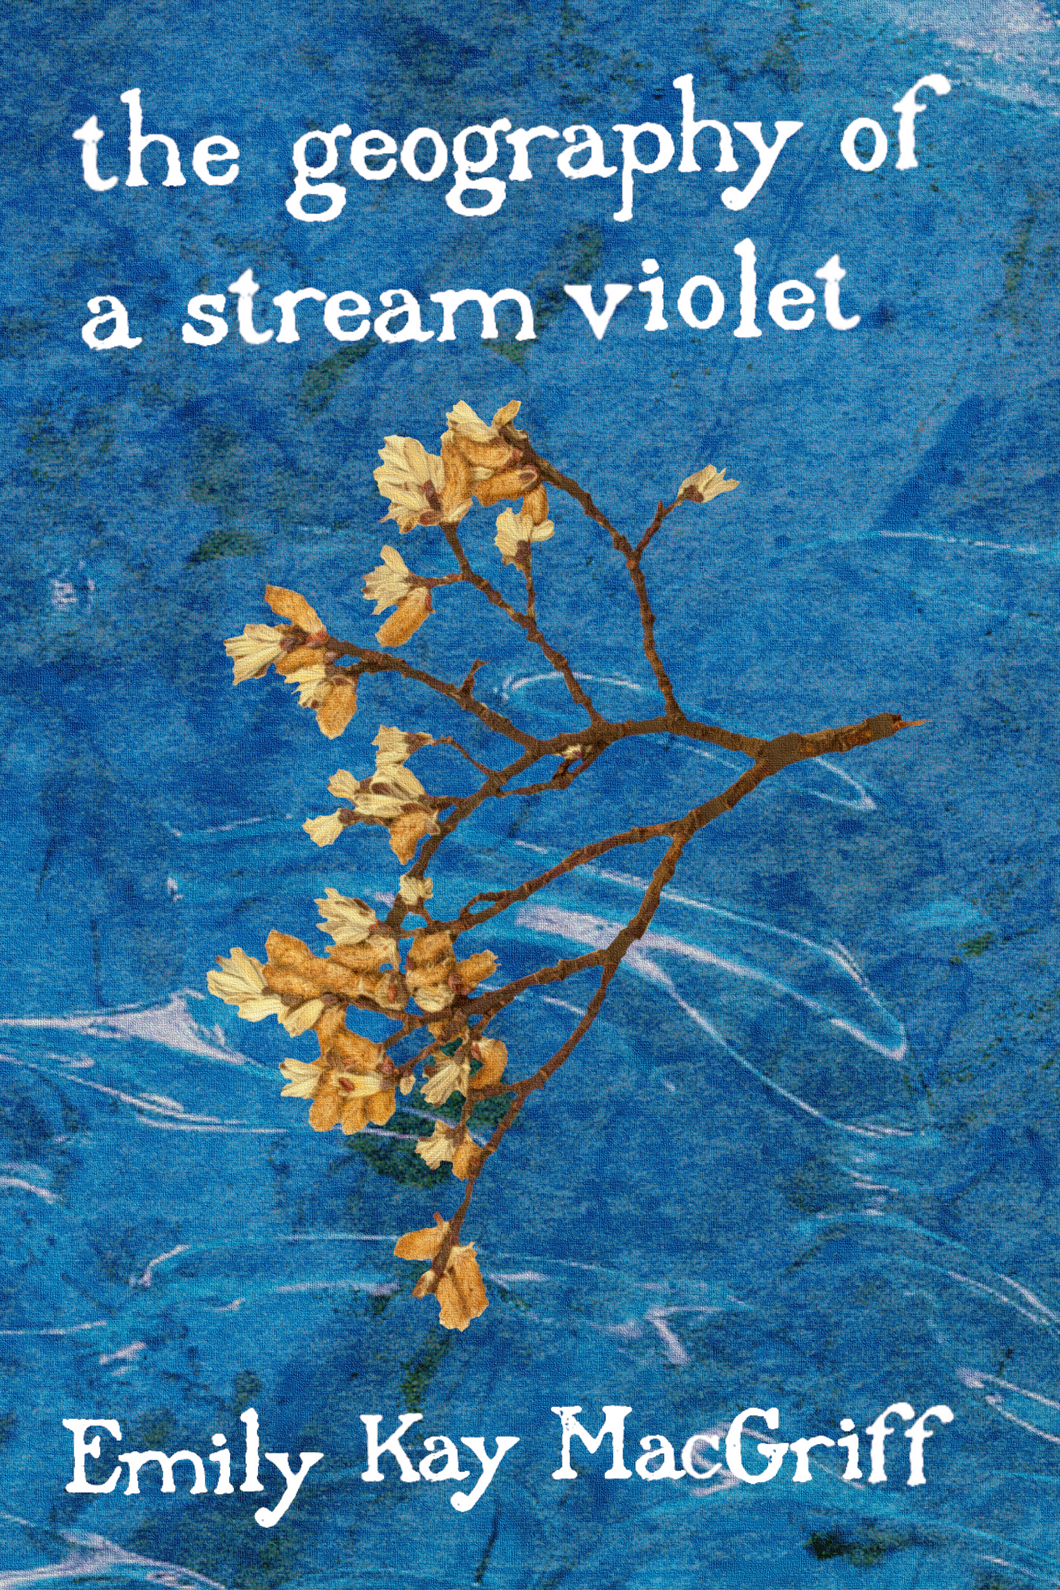 the geography of a stream violet, by Emily Kay MacGriff-Print Books-Bottlecap Press